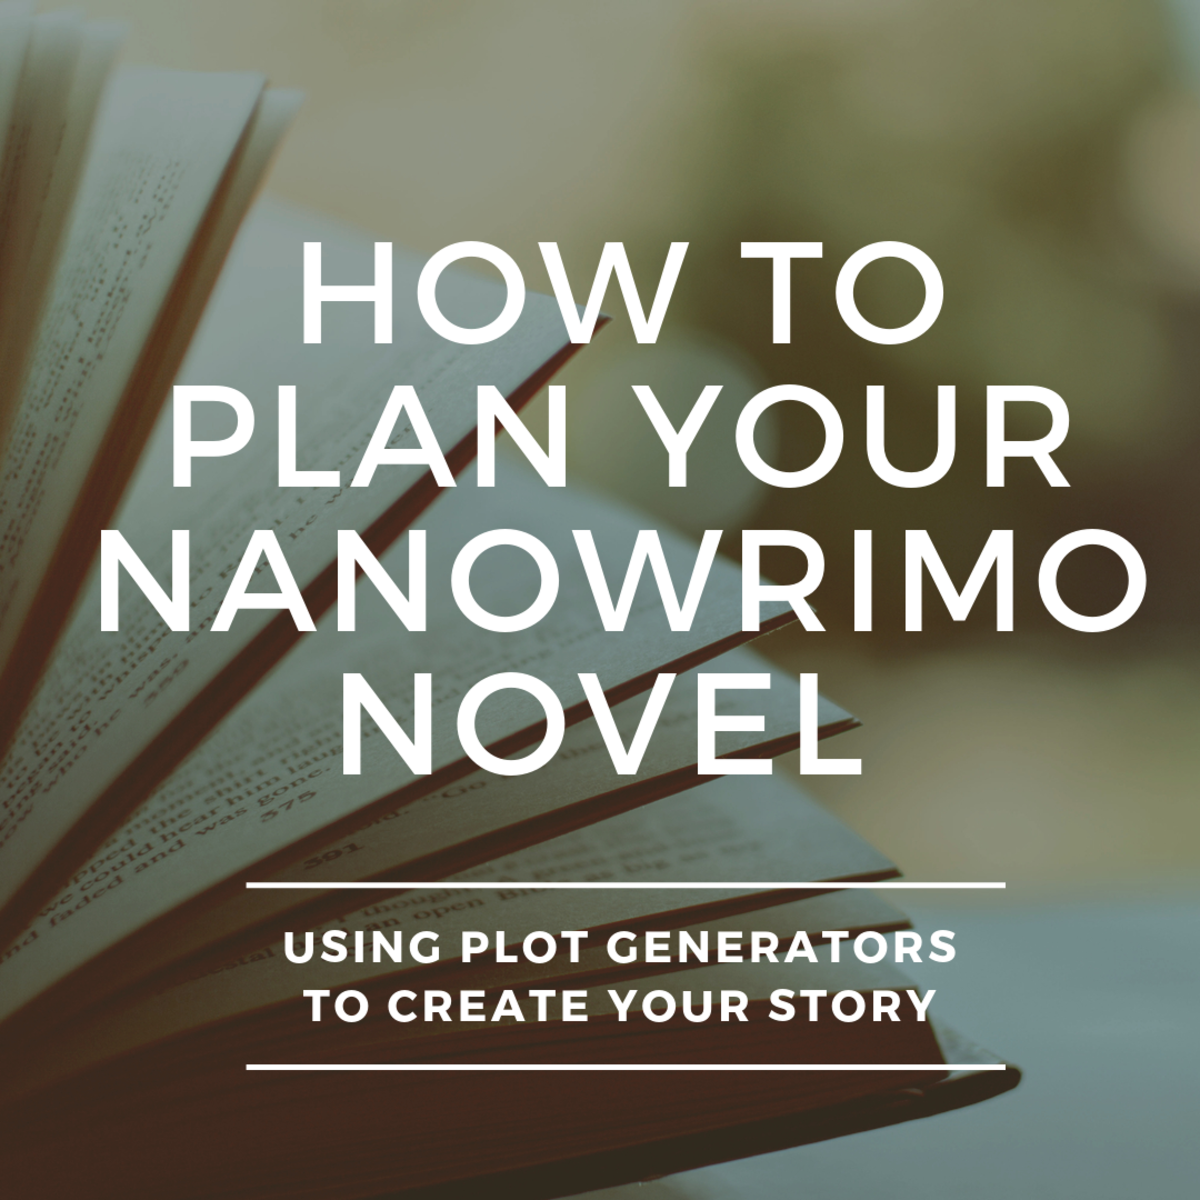 How to Use Plot Generators for NaNoWriMo (Story Ideas & Tips)